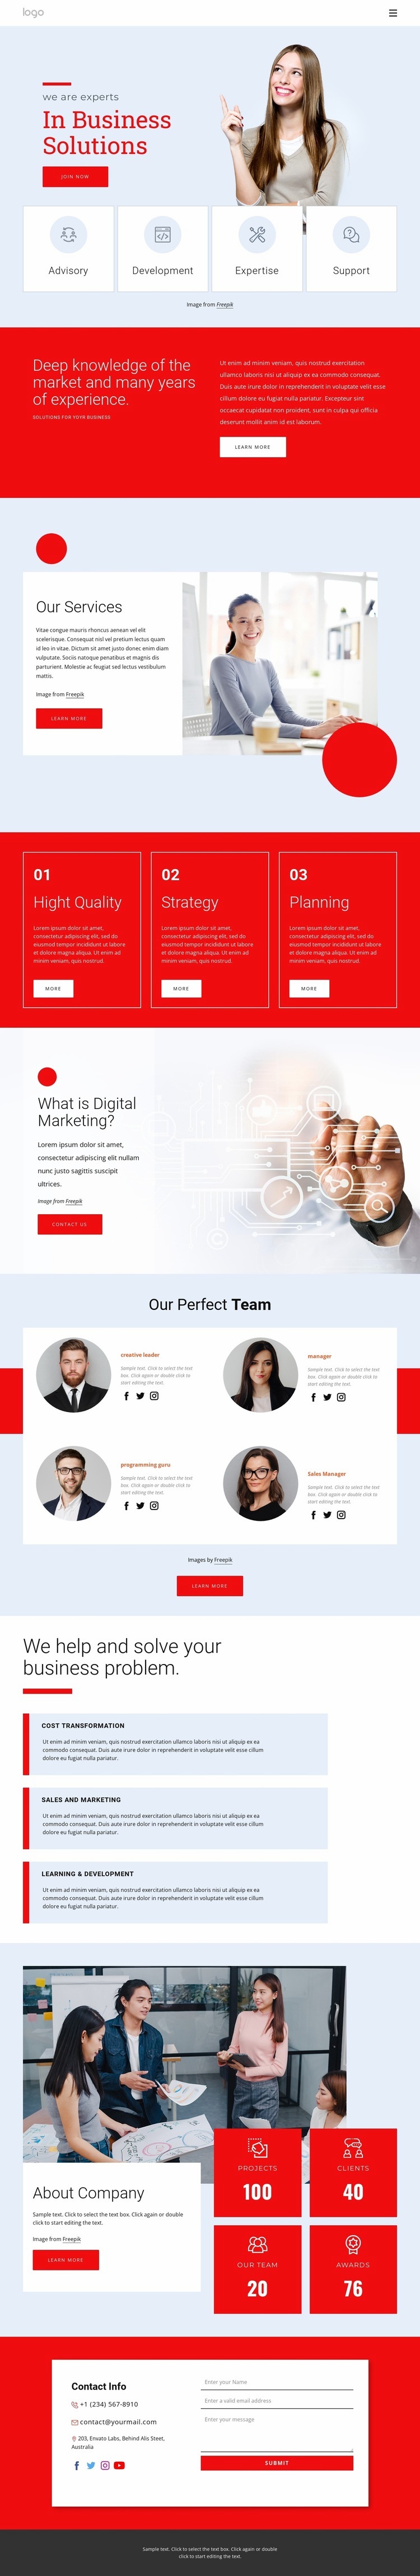 We are experts in business solutions Squarespace Template Alternative